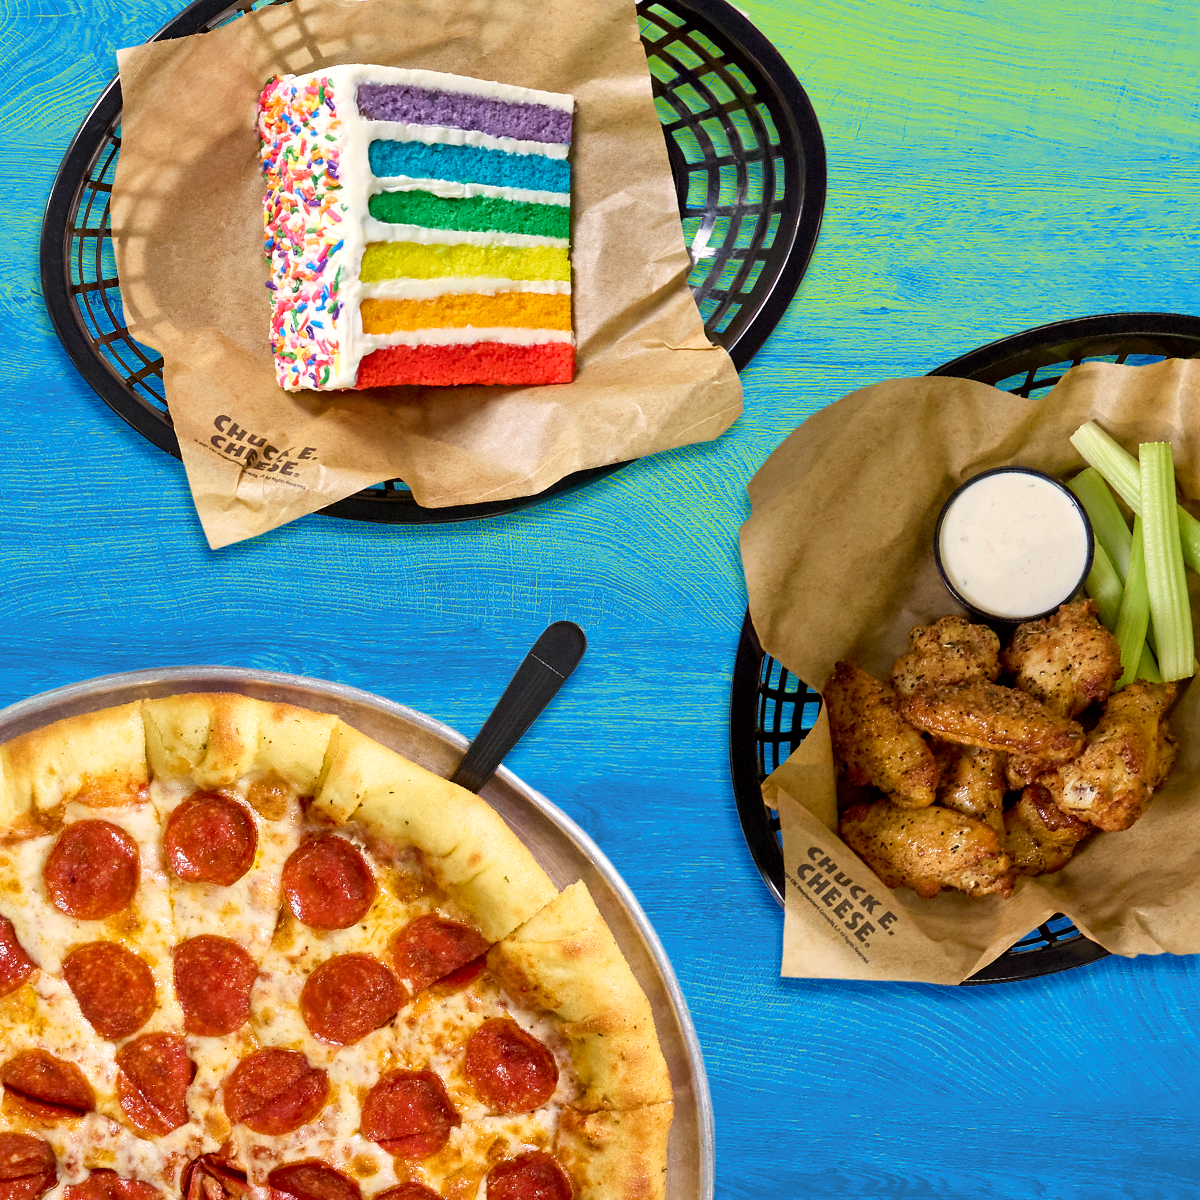 rainbow cake, pizza, and wings